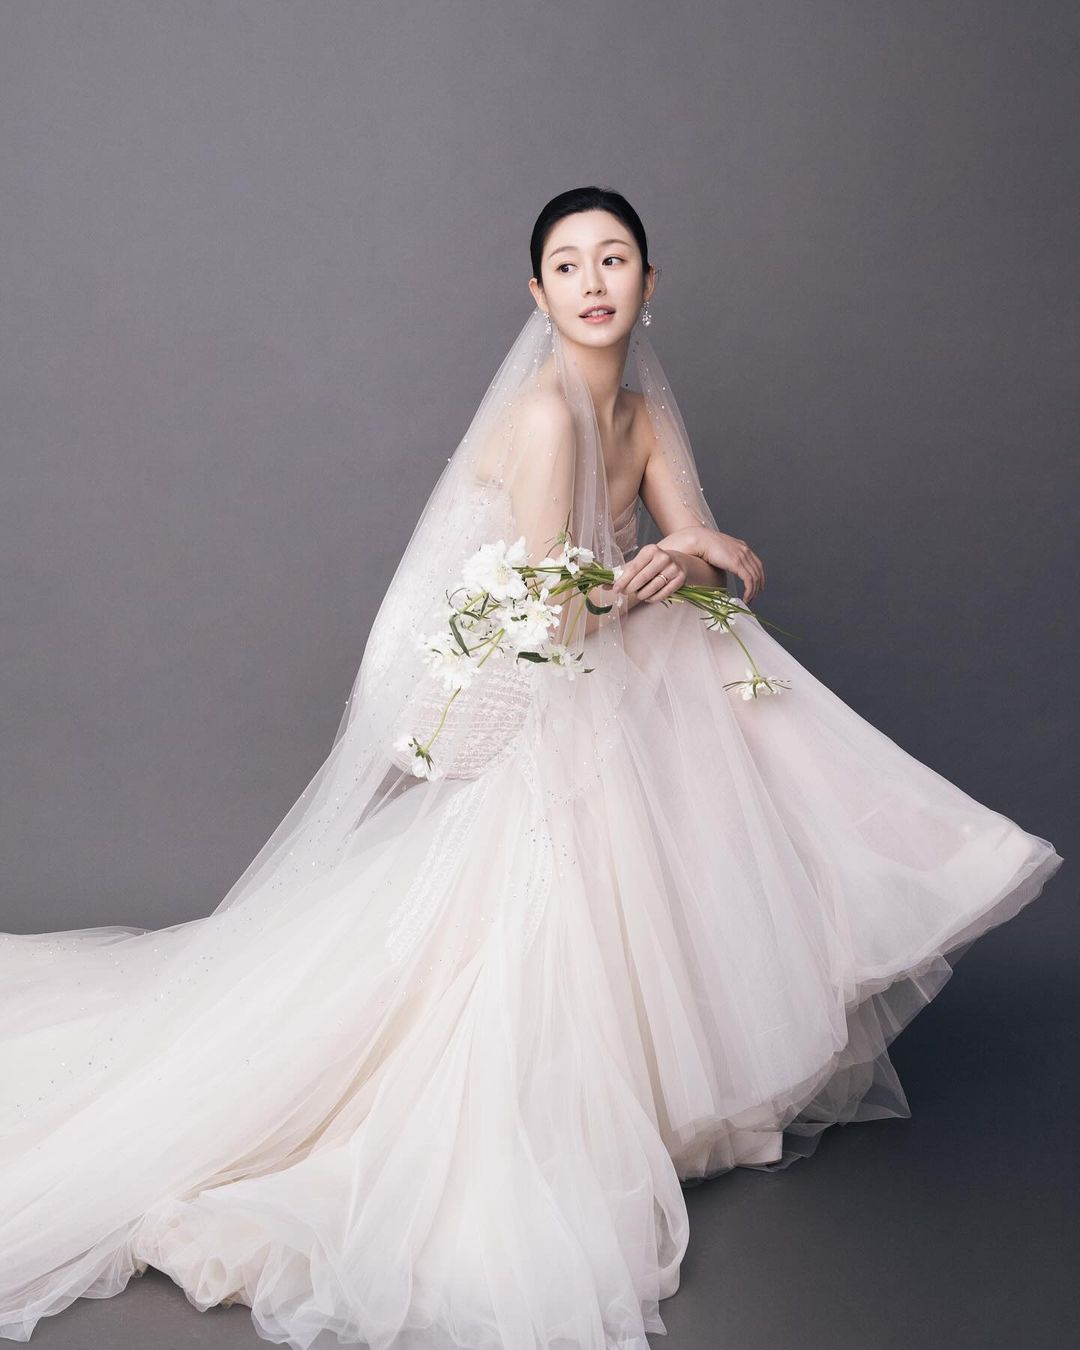 Lee Da In And Lee Seung Gi Celebrate 1st Wedding Anniversary With Beautiful Photos